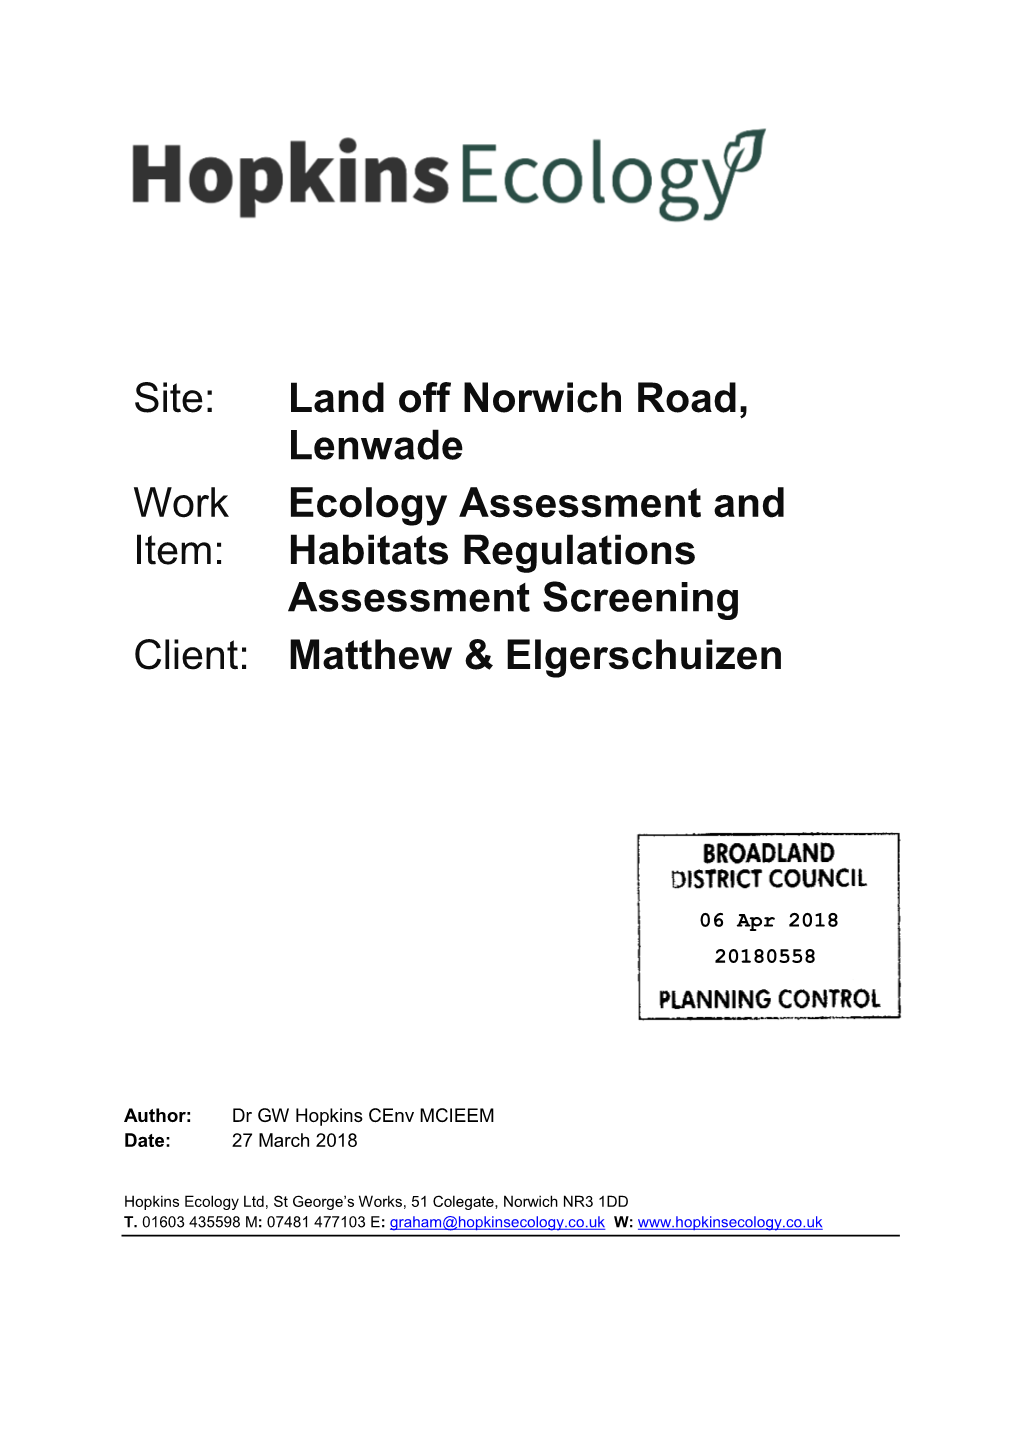 Site: Land Off Norwich Road, Lenwade Work Item: Ecology Assessment